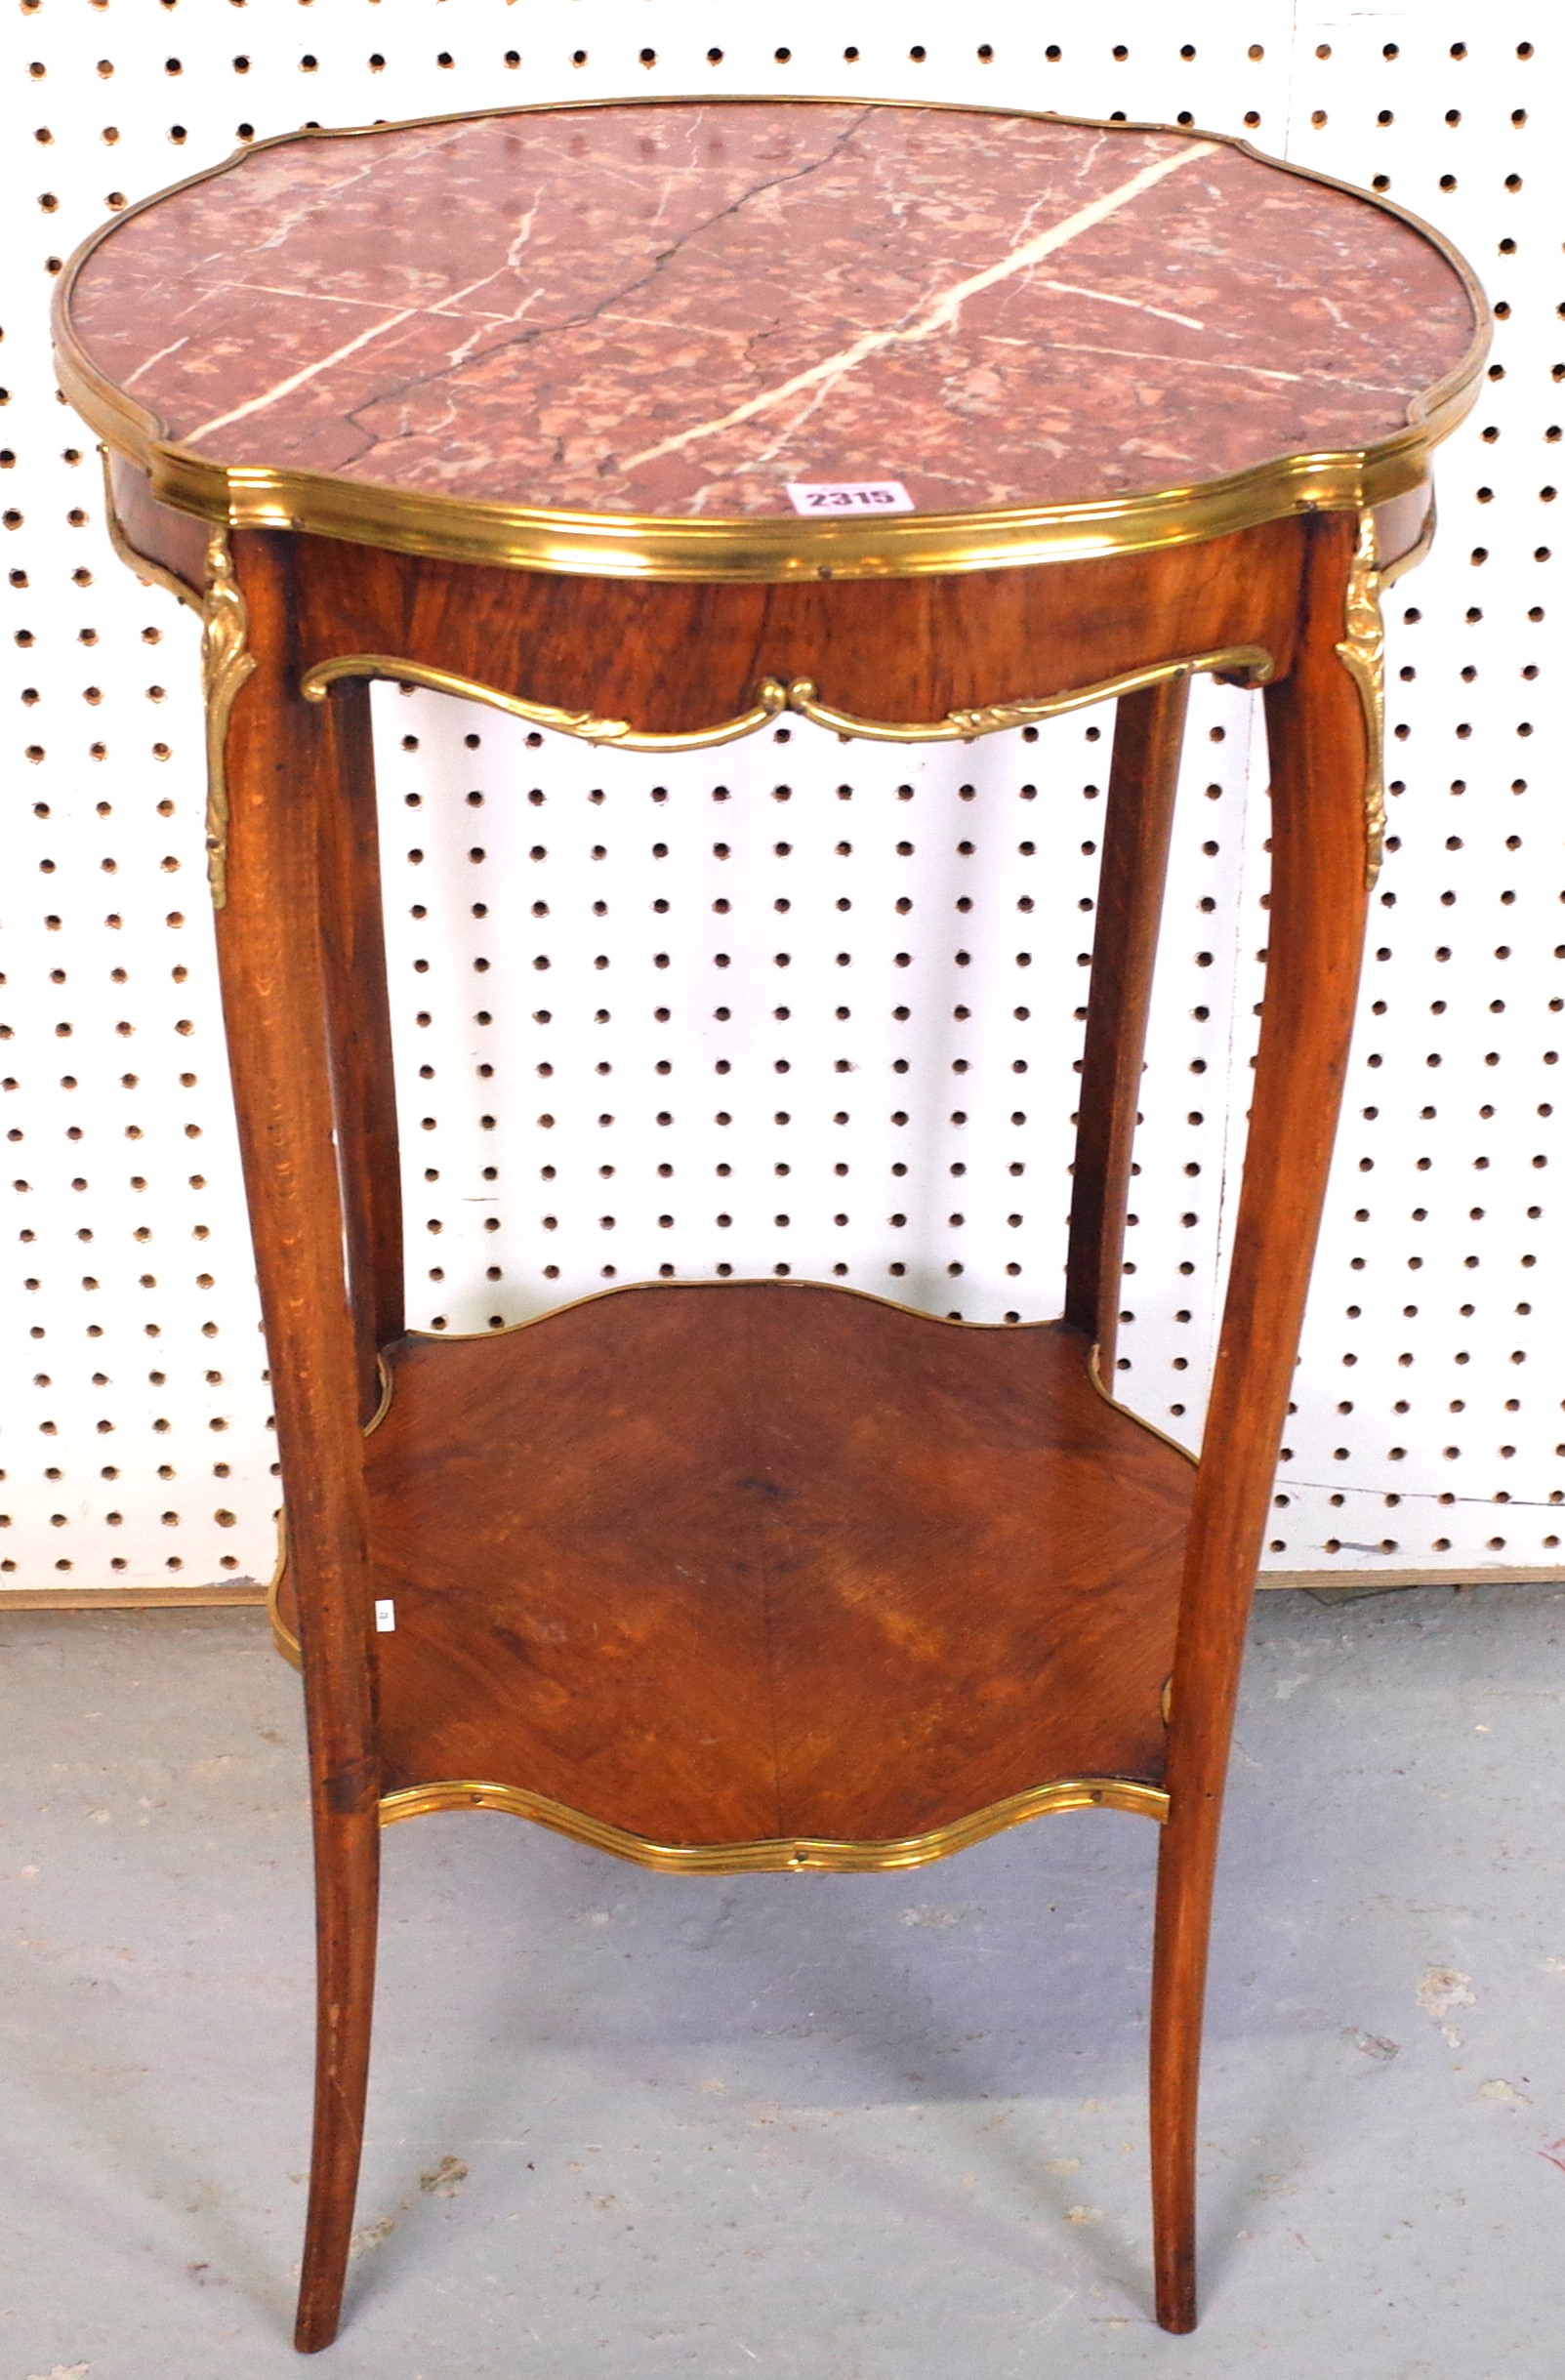 AN 18TH CENTURY STYLE FRENCH GILT METAL MARBLE TOPPED OCCASIONAL TABLE